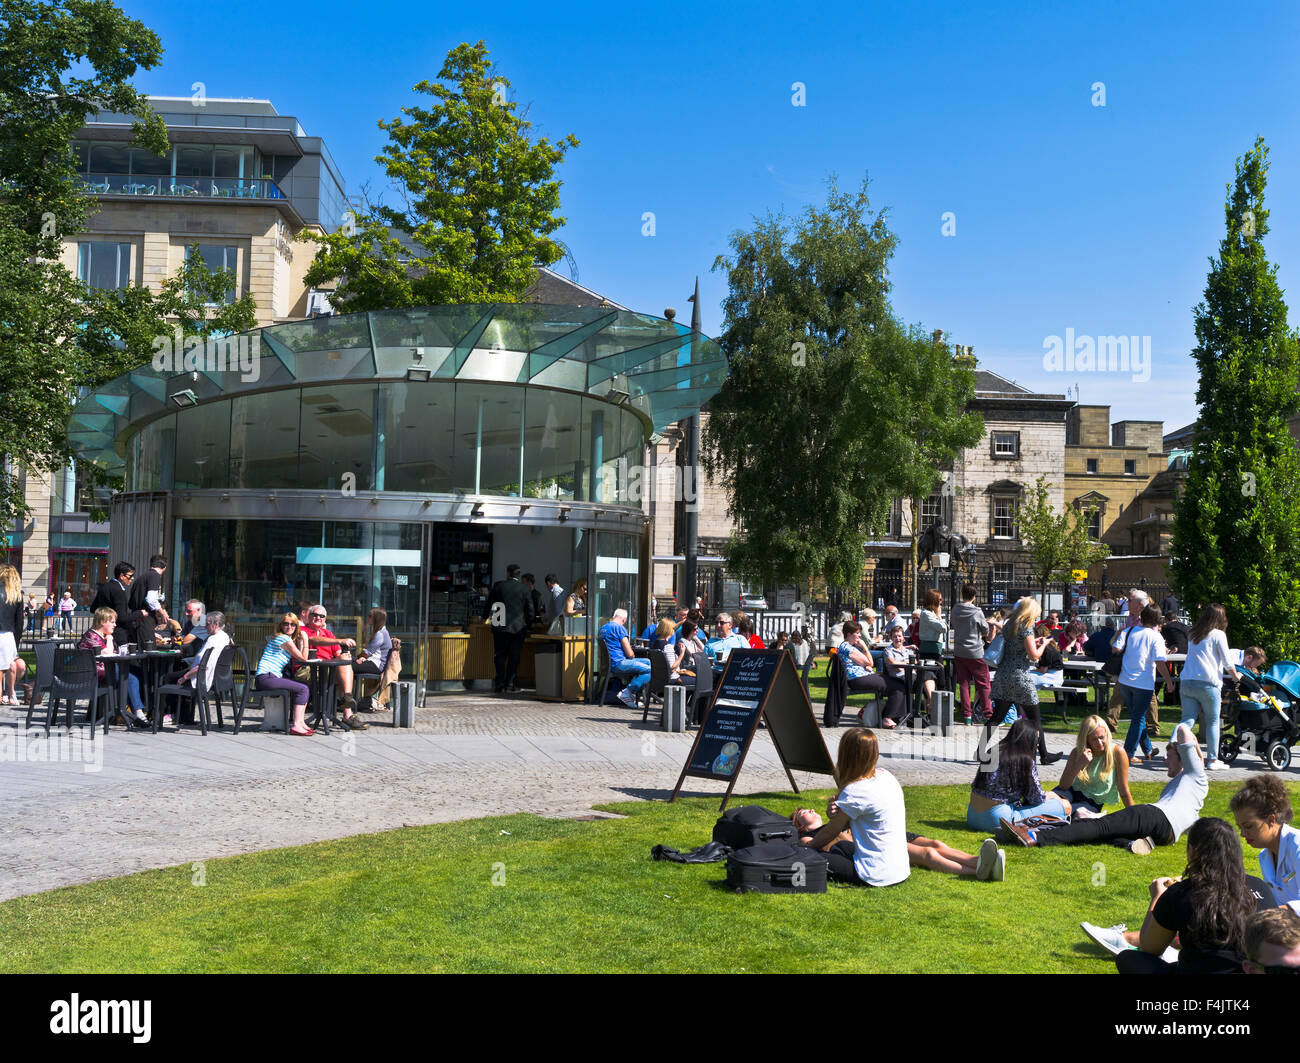 dh  ST ANDREWS SQUARE EDINBURGH people relaxing public gardens outdoor cafe summertime sunshine summer city outdoors uk Stock Photo